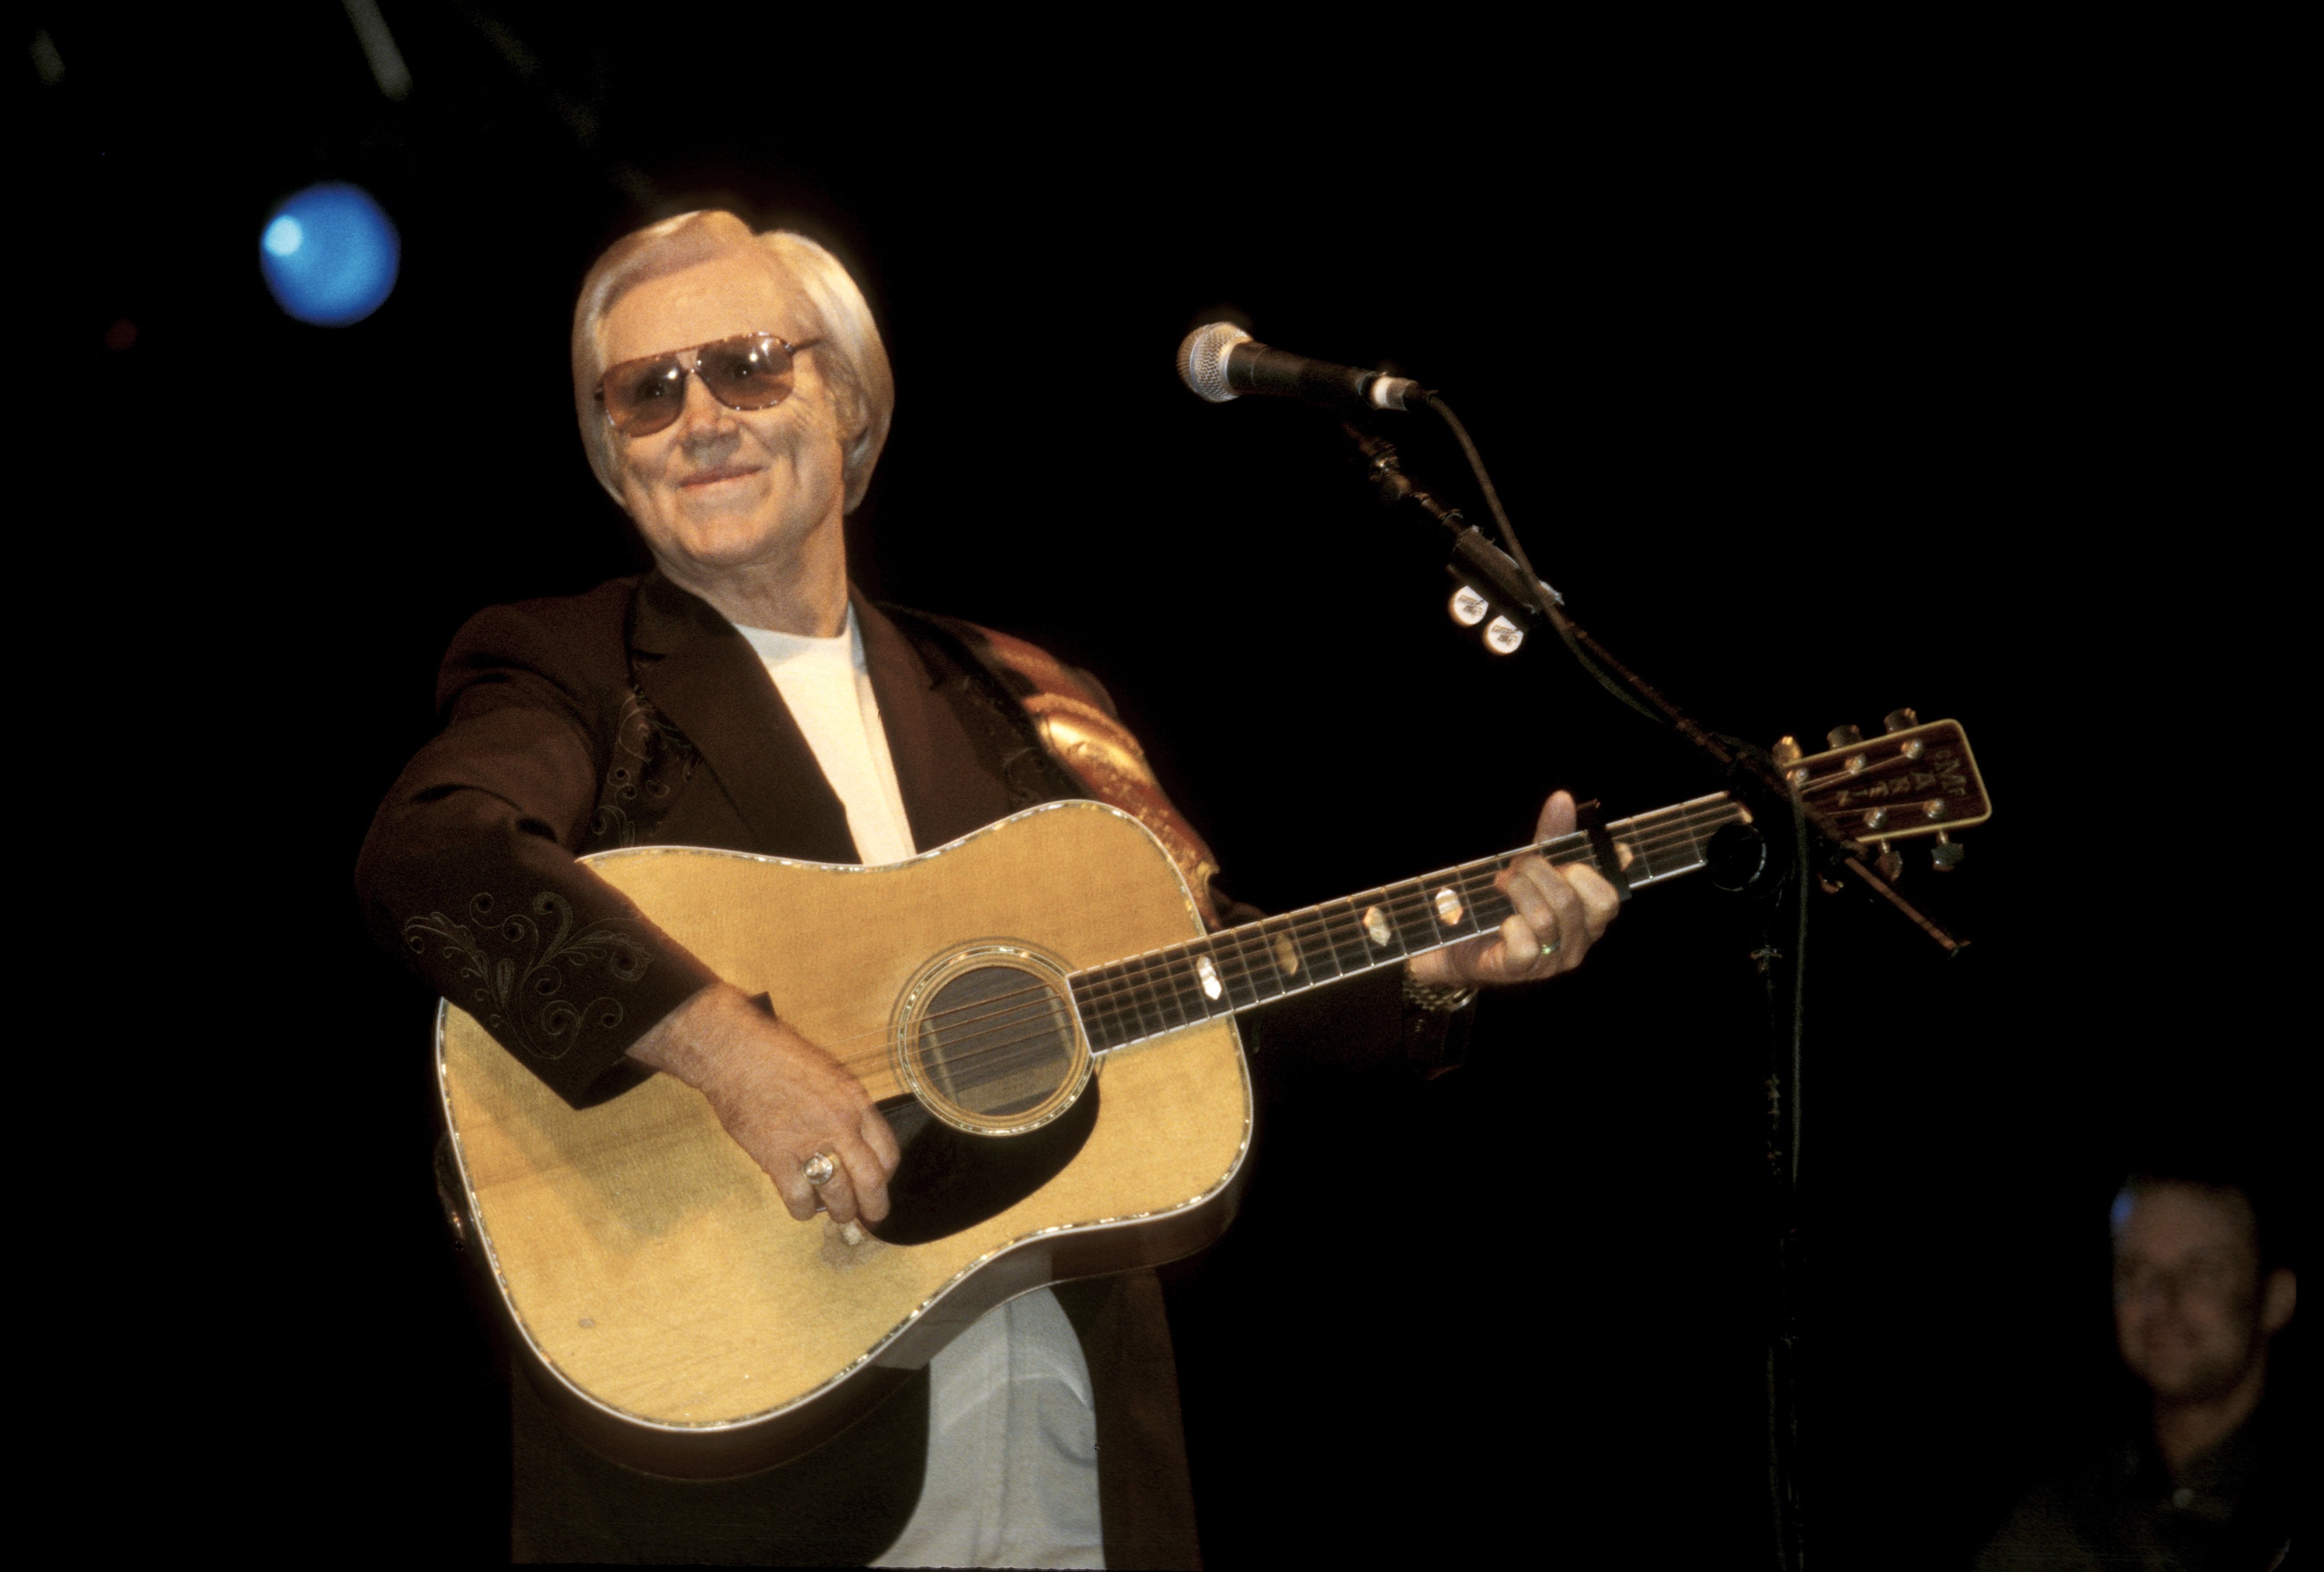 Country music star George Jones performs during a "live" concert appearance on September 24, 2000. | Source: Getty Images